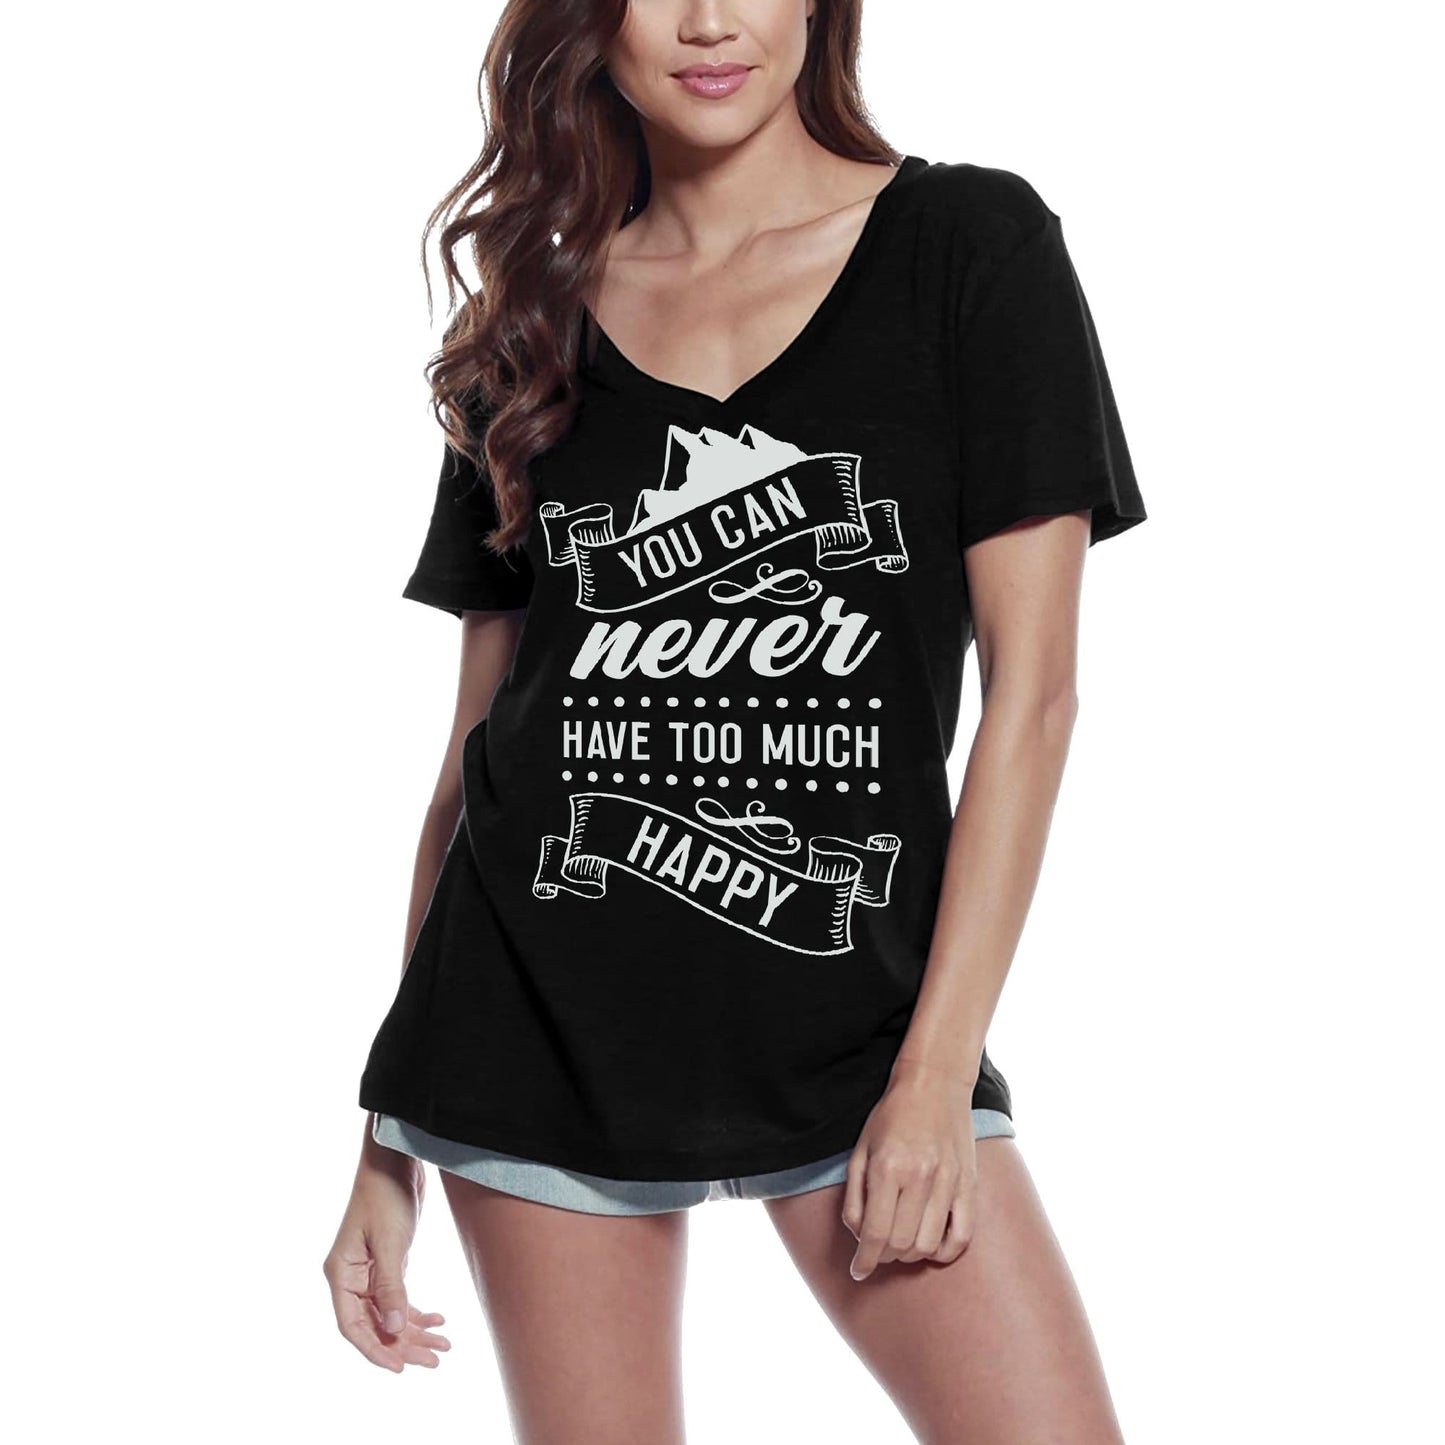 ULTRABASIC Women's V Neck T-Shirt You Can Never Have Too Much Happy - Vintage Shirt